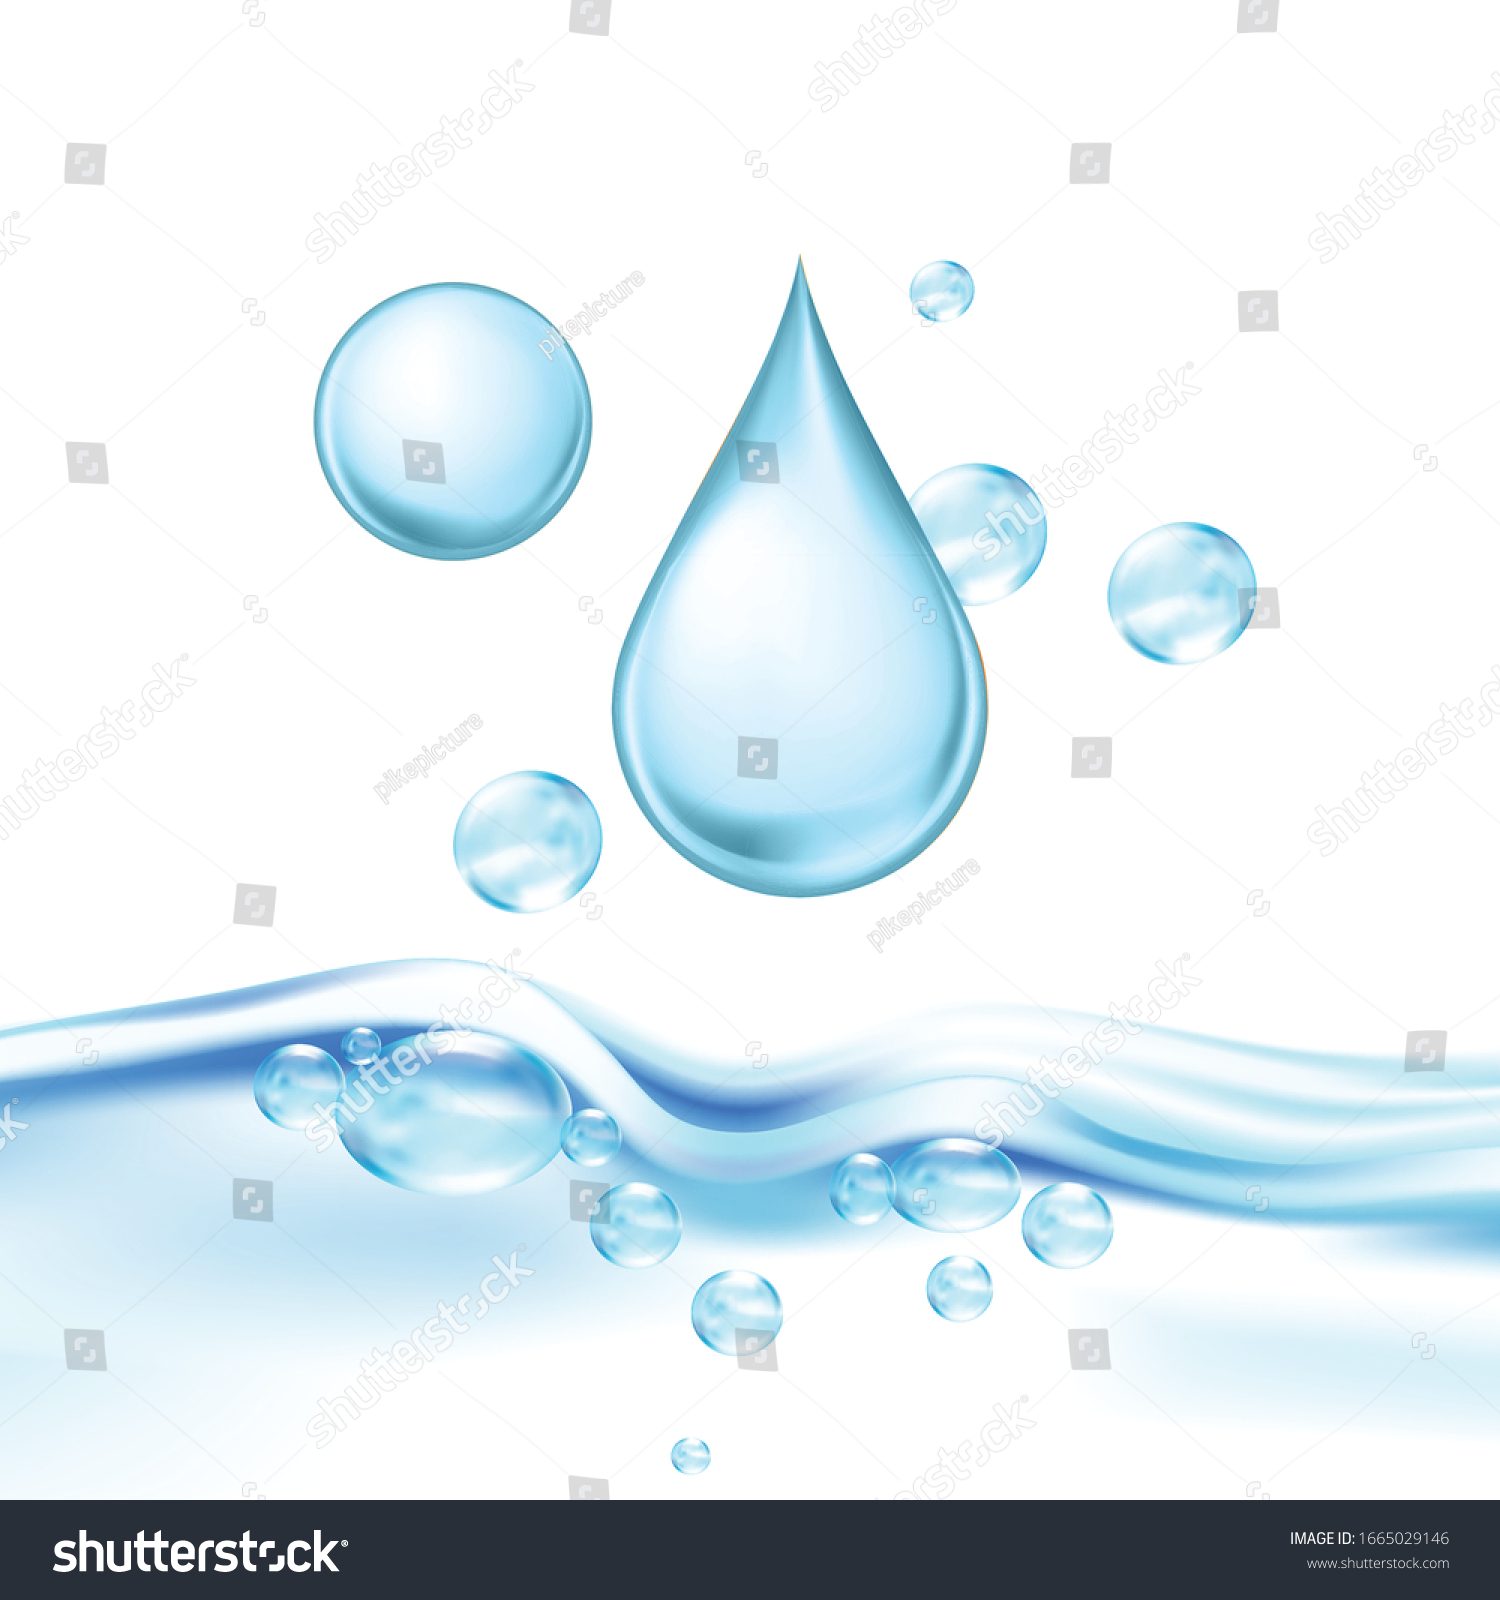 Falling Mineral Water Drop And Air Bubbles Vector. Drinking Crystal Clear Water For Quenching Thirst, Fresh Aqua Wavy Transparent Purity Nature Liquid. Concept Template Realistic 3d Illustration #1665029146